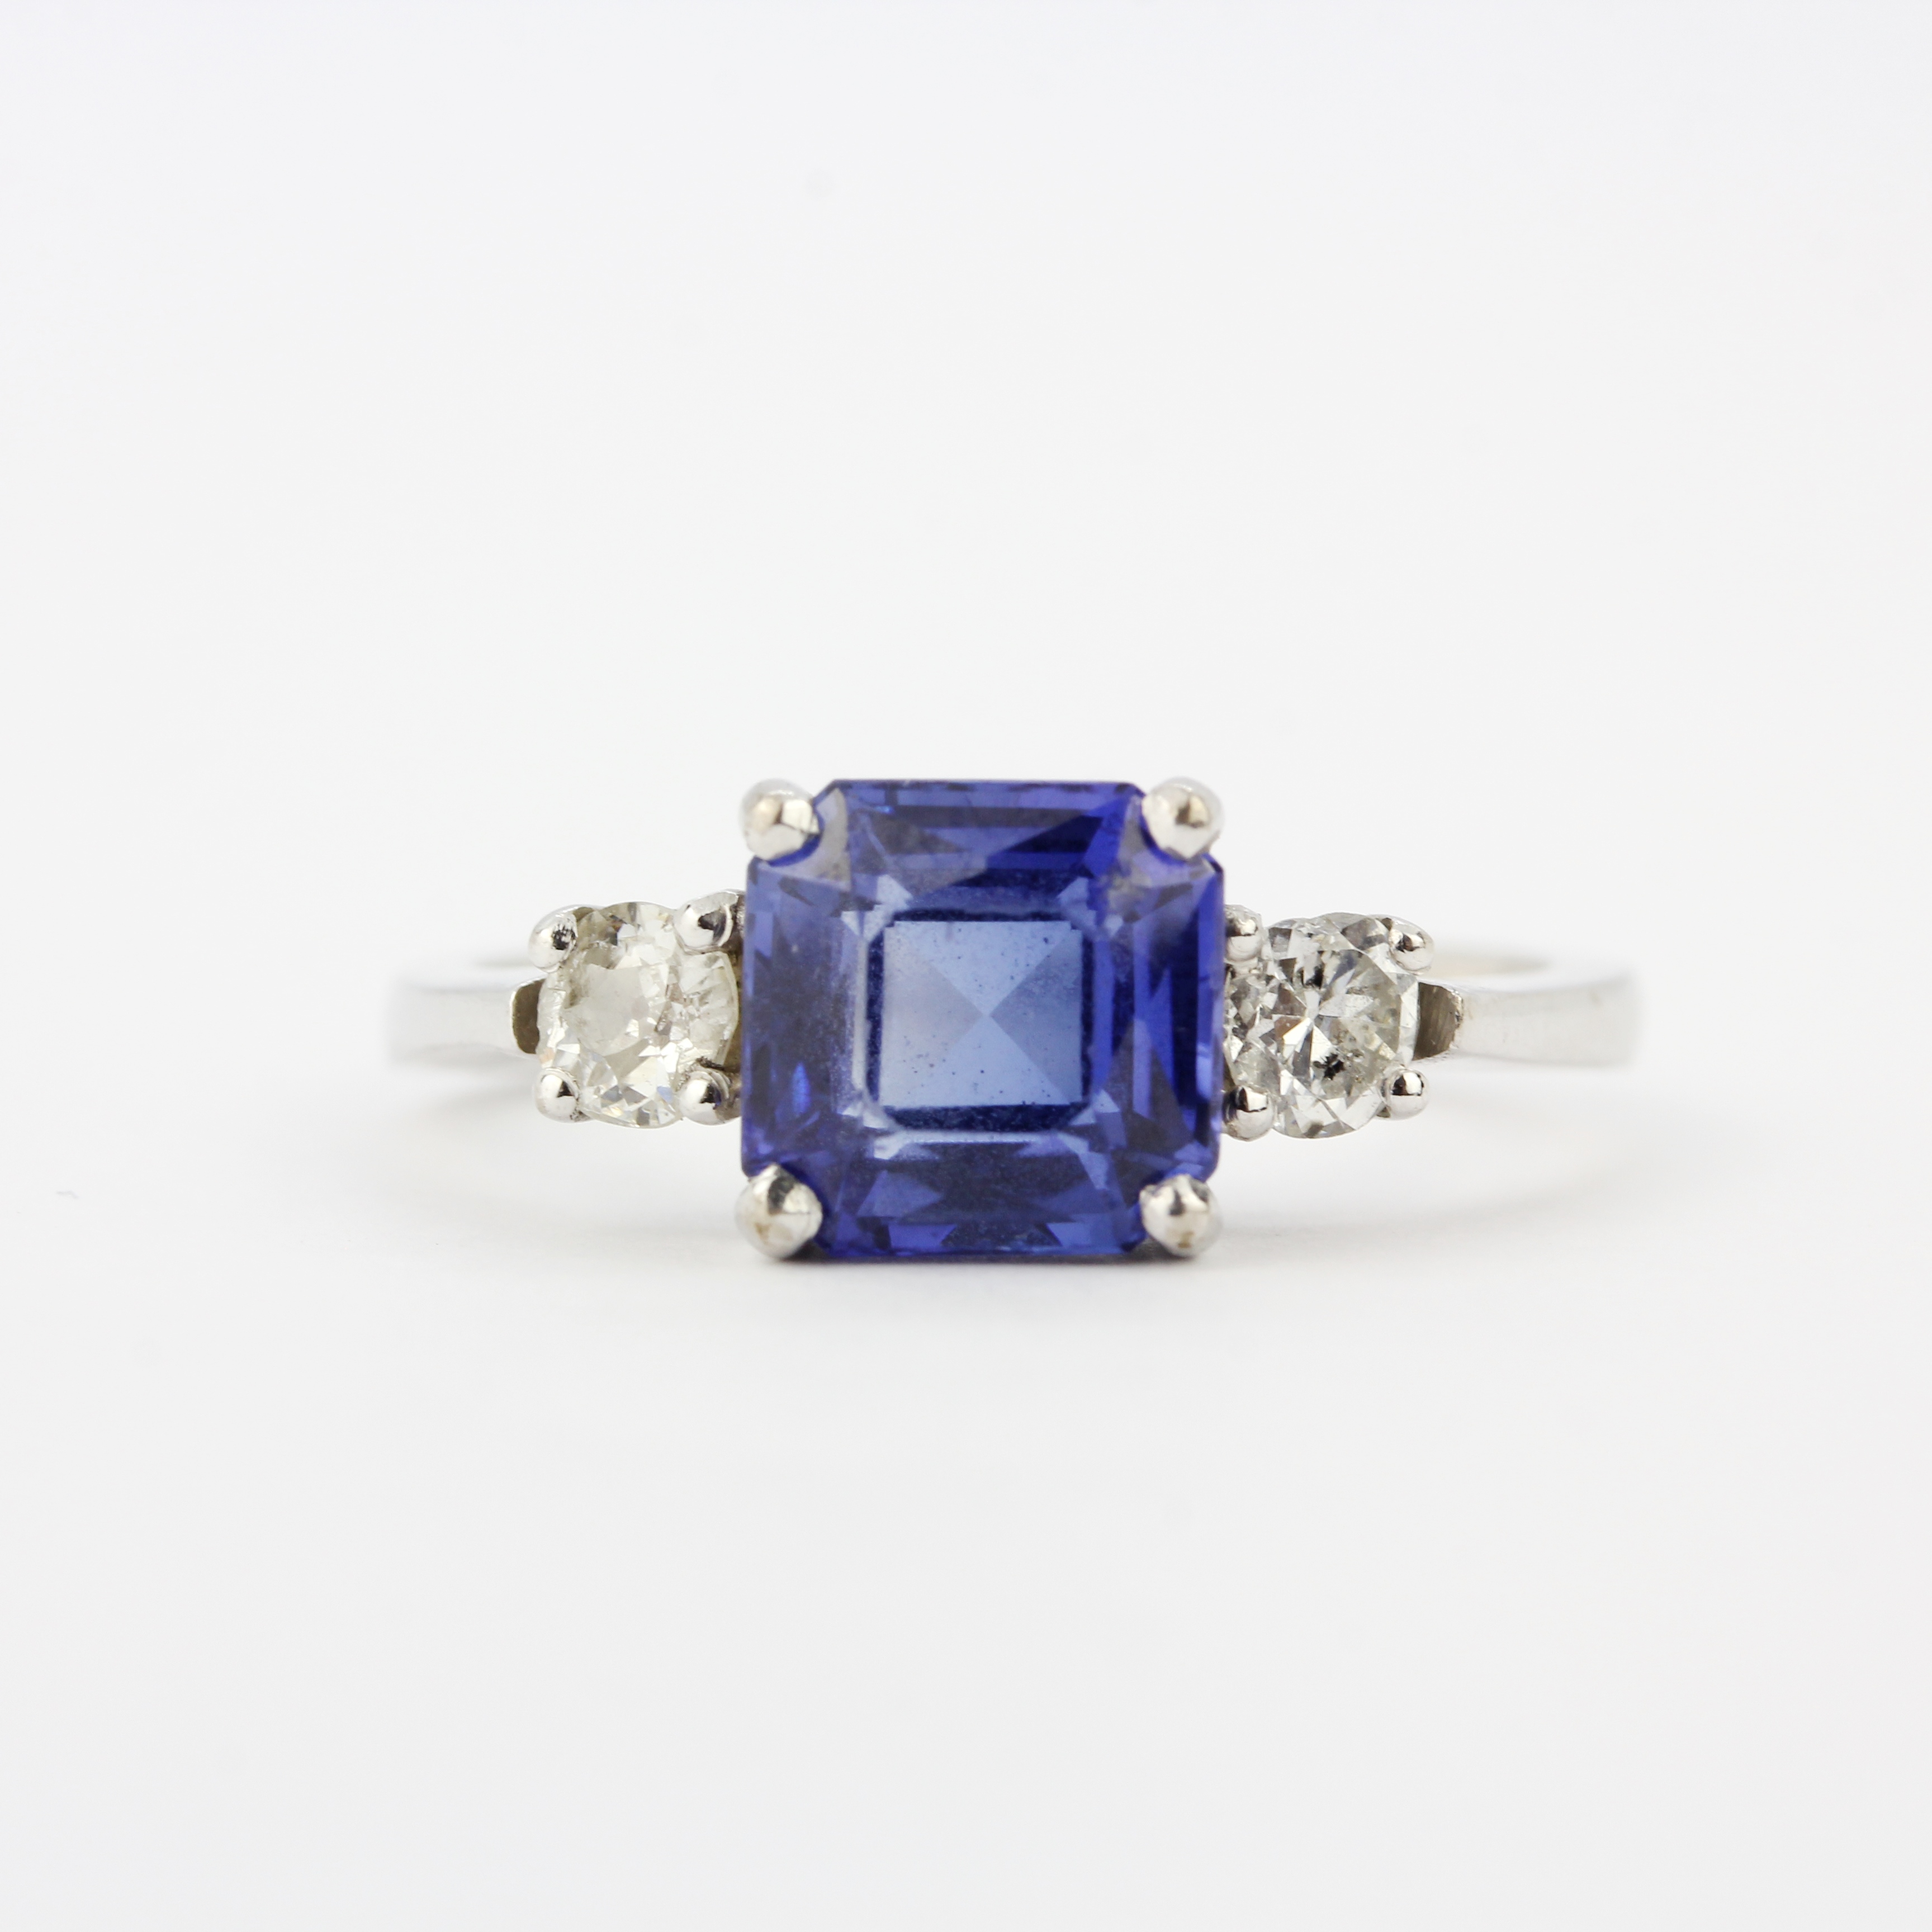 An 18ct white gold ring set with a fancy cut sapphire flanked by brilliant cut diamonds, diamonds - Image 3 of 4